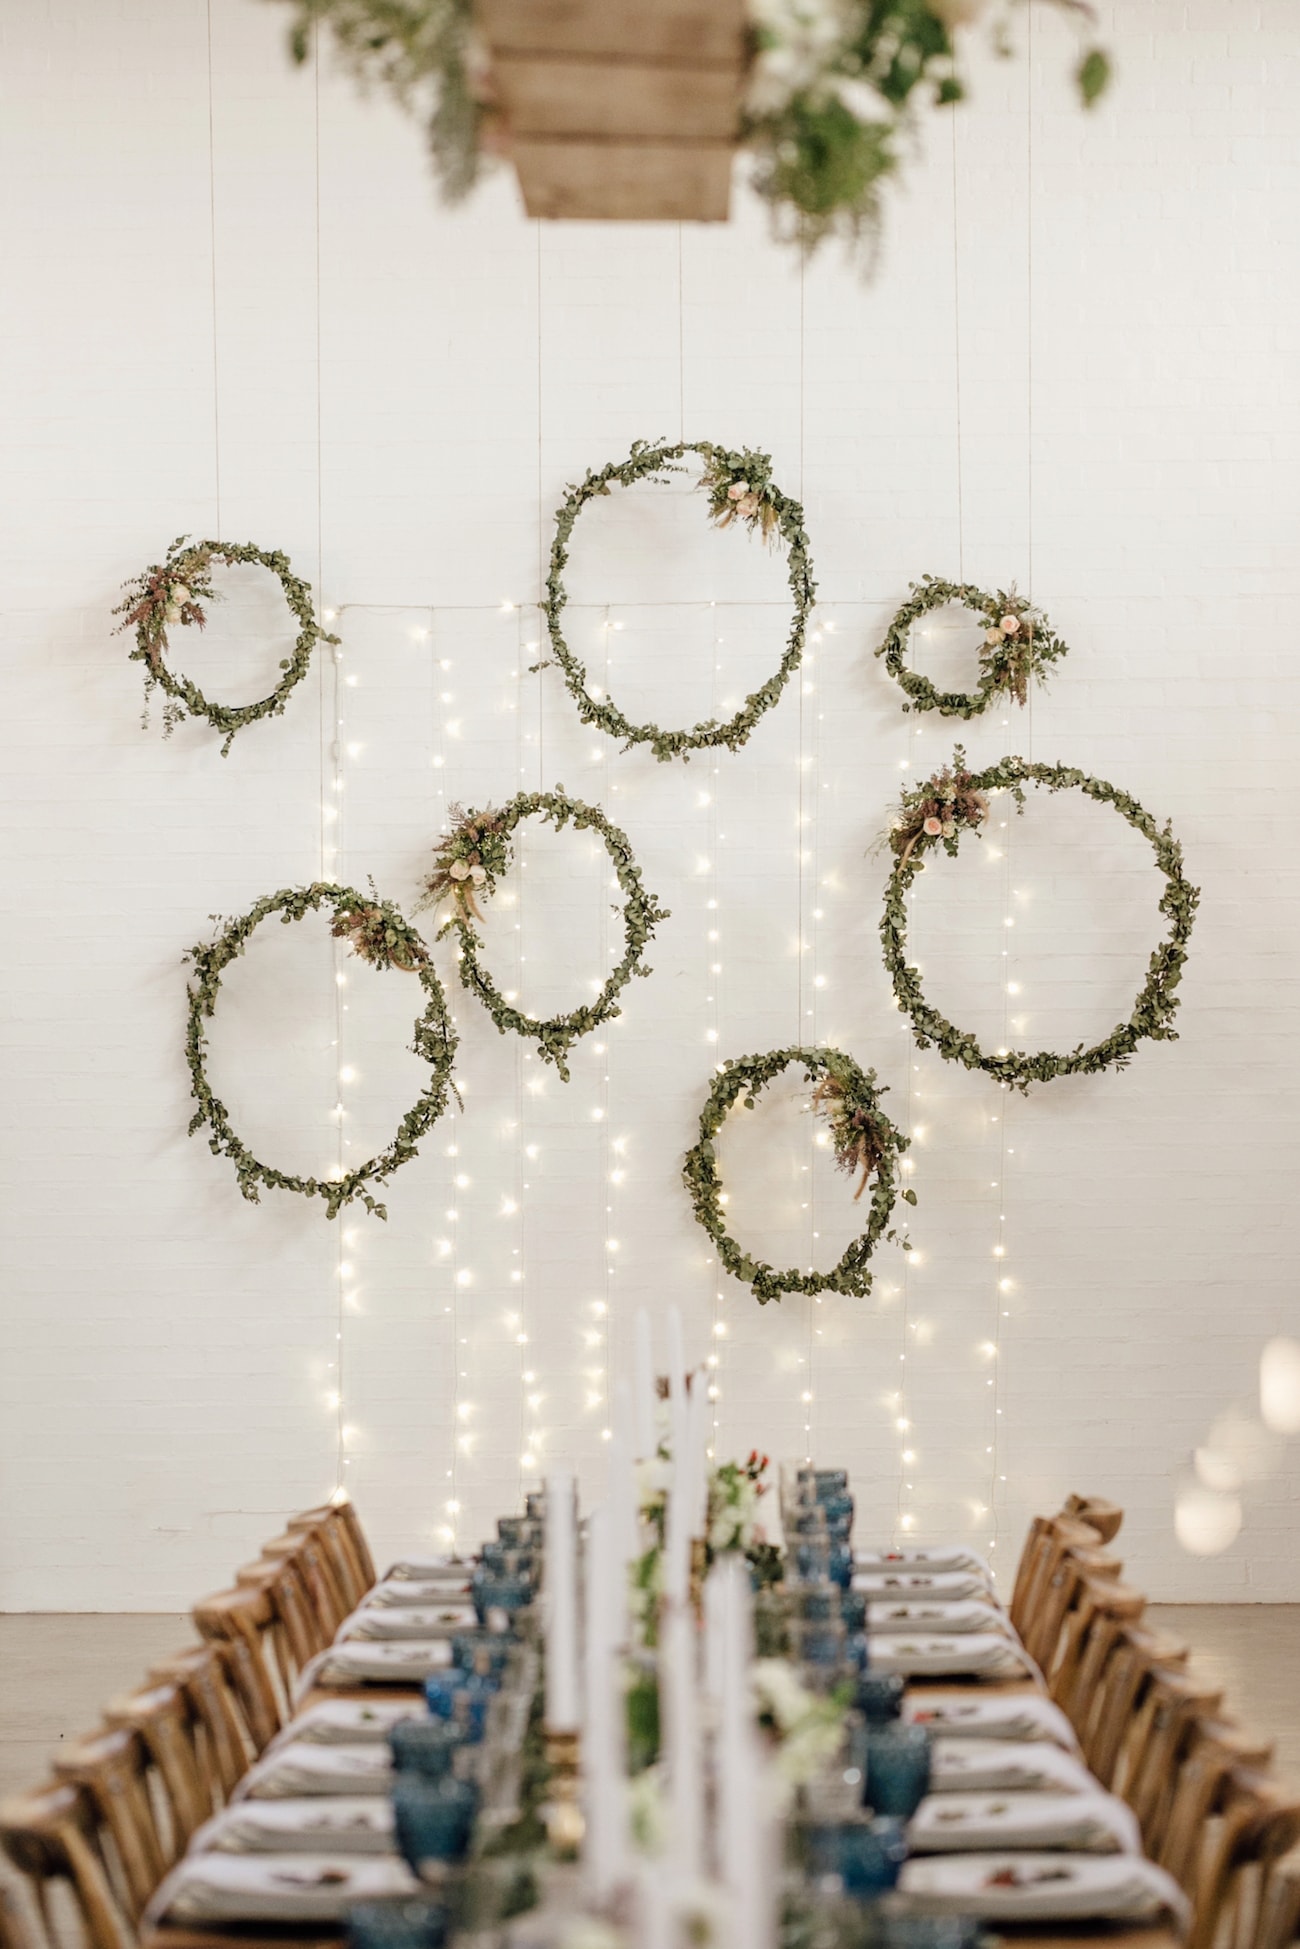 Hanging Greenery Wreaths | Credit: Page & Holmes